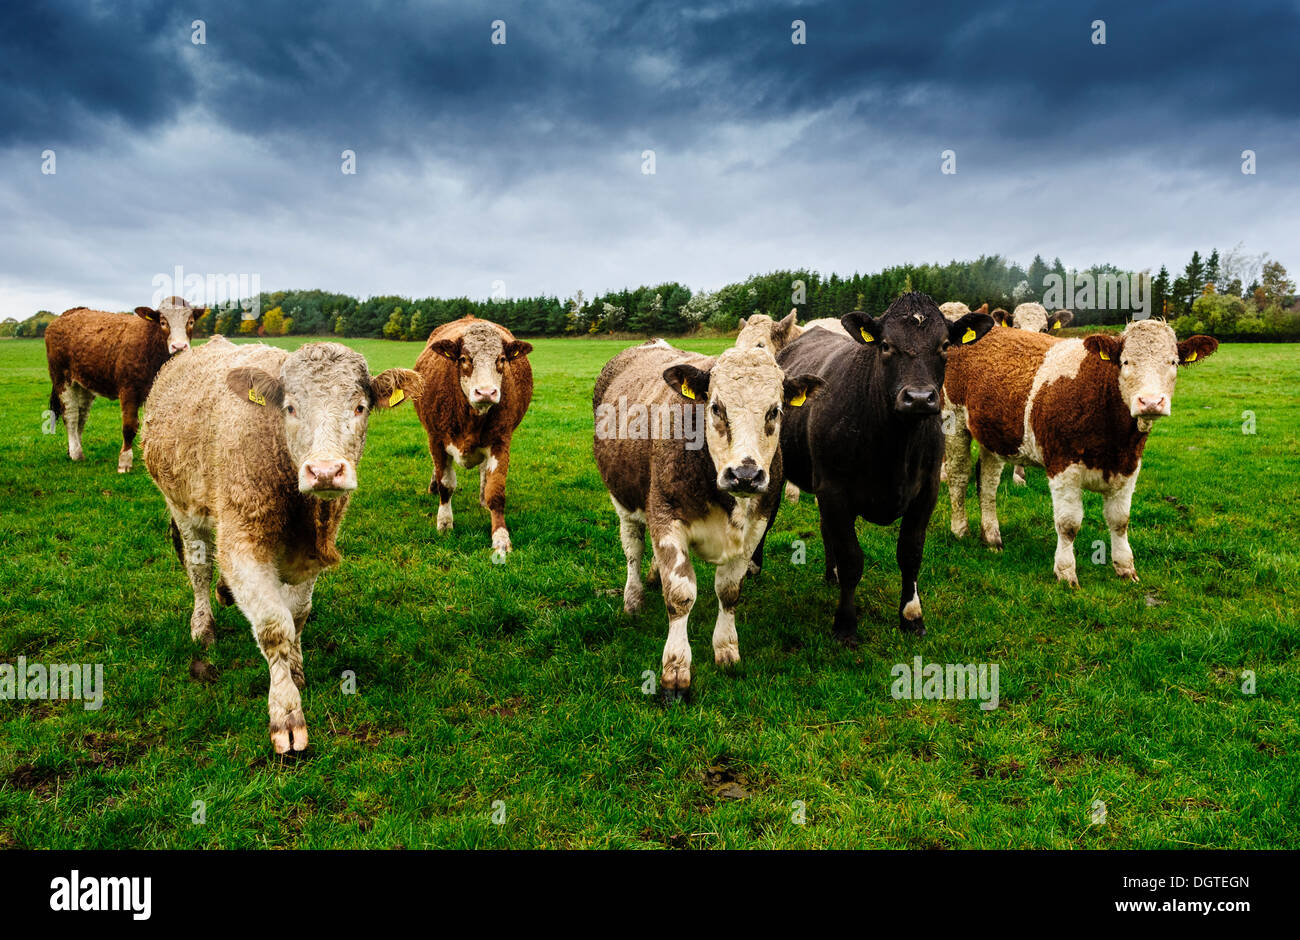 Curious cows in a field Stock Photo